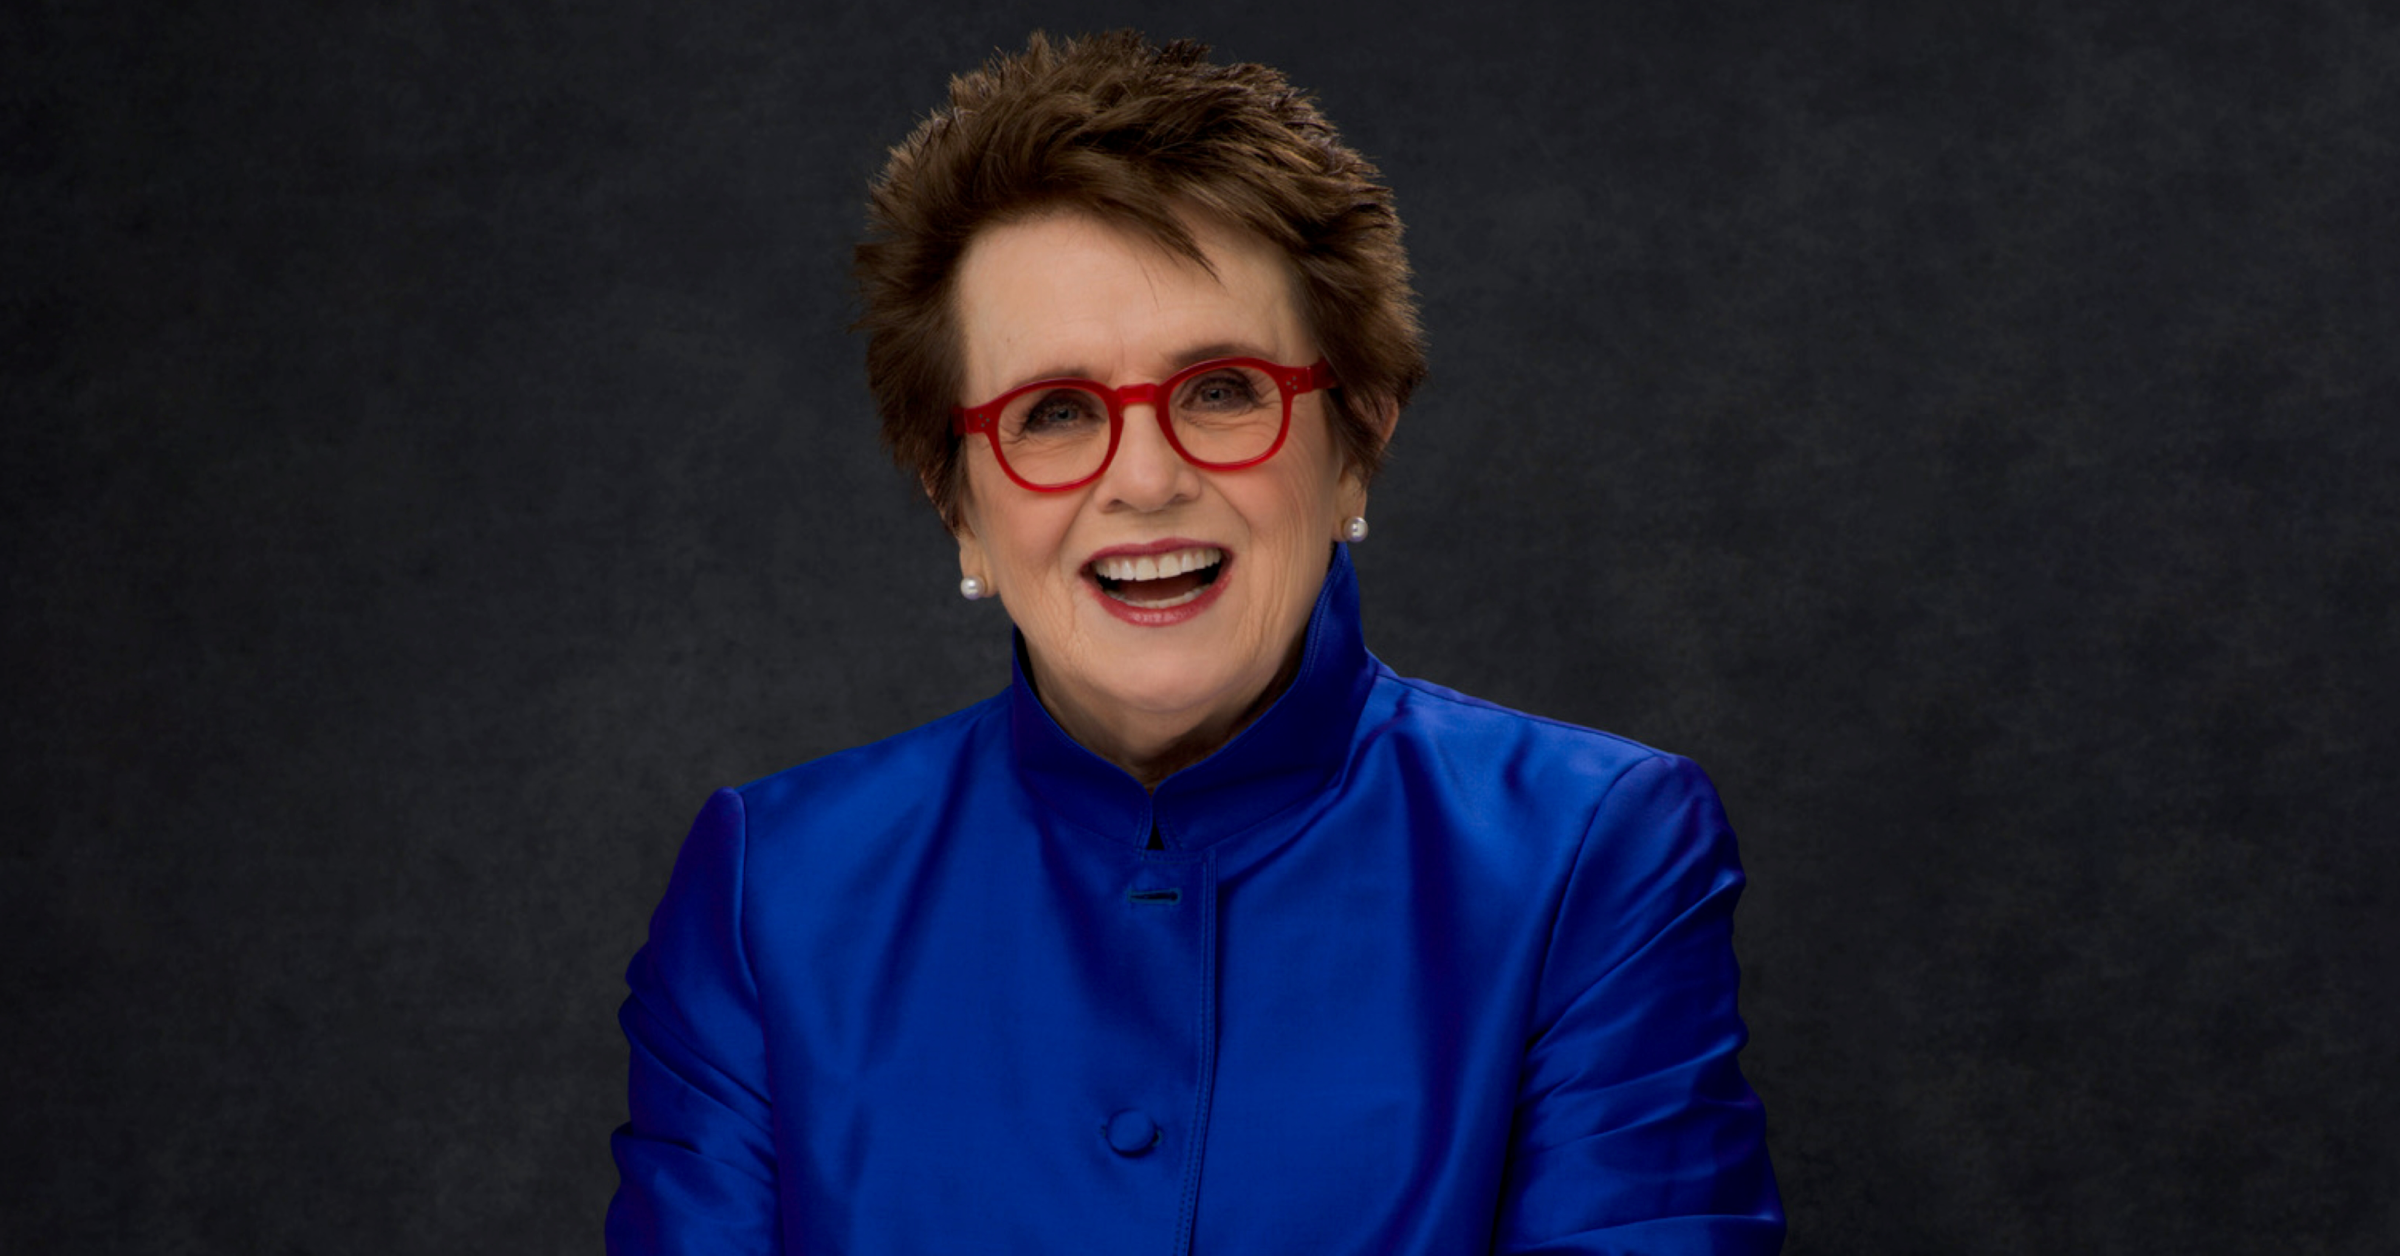 Billie Jean King smiling in a blue blazer and wearing red glasses.